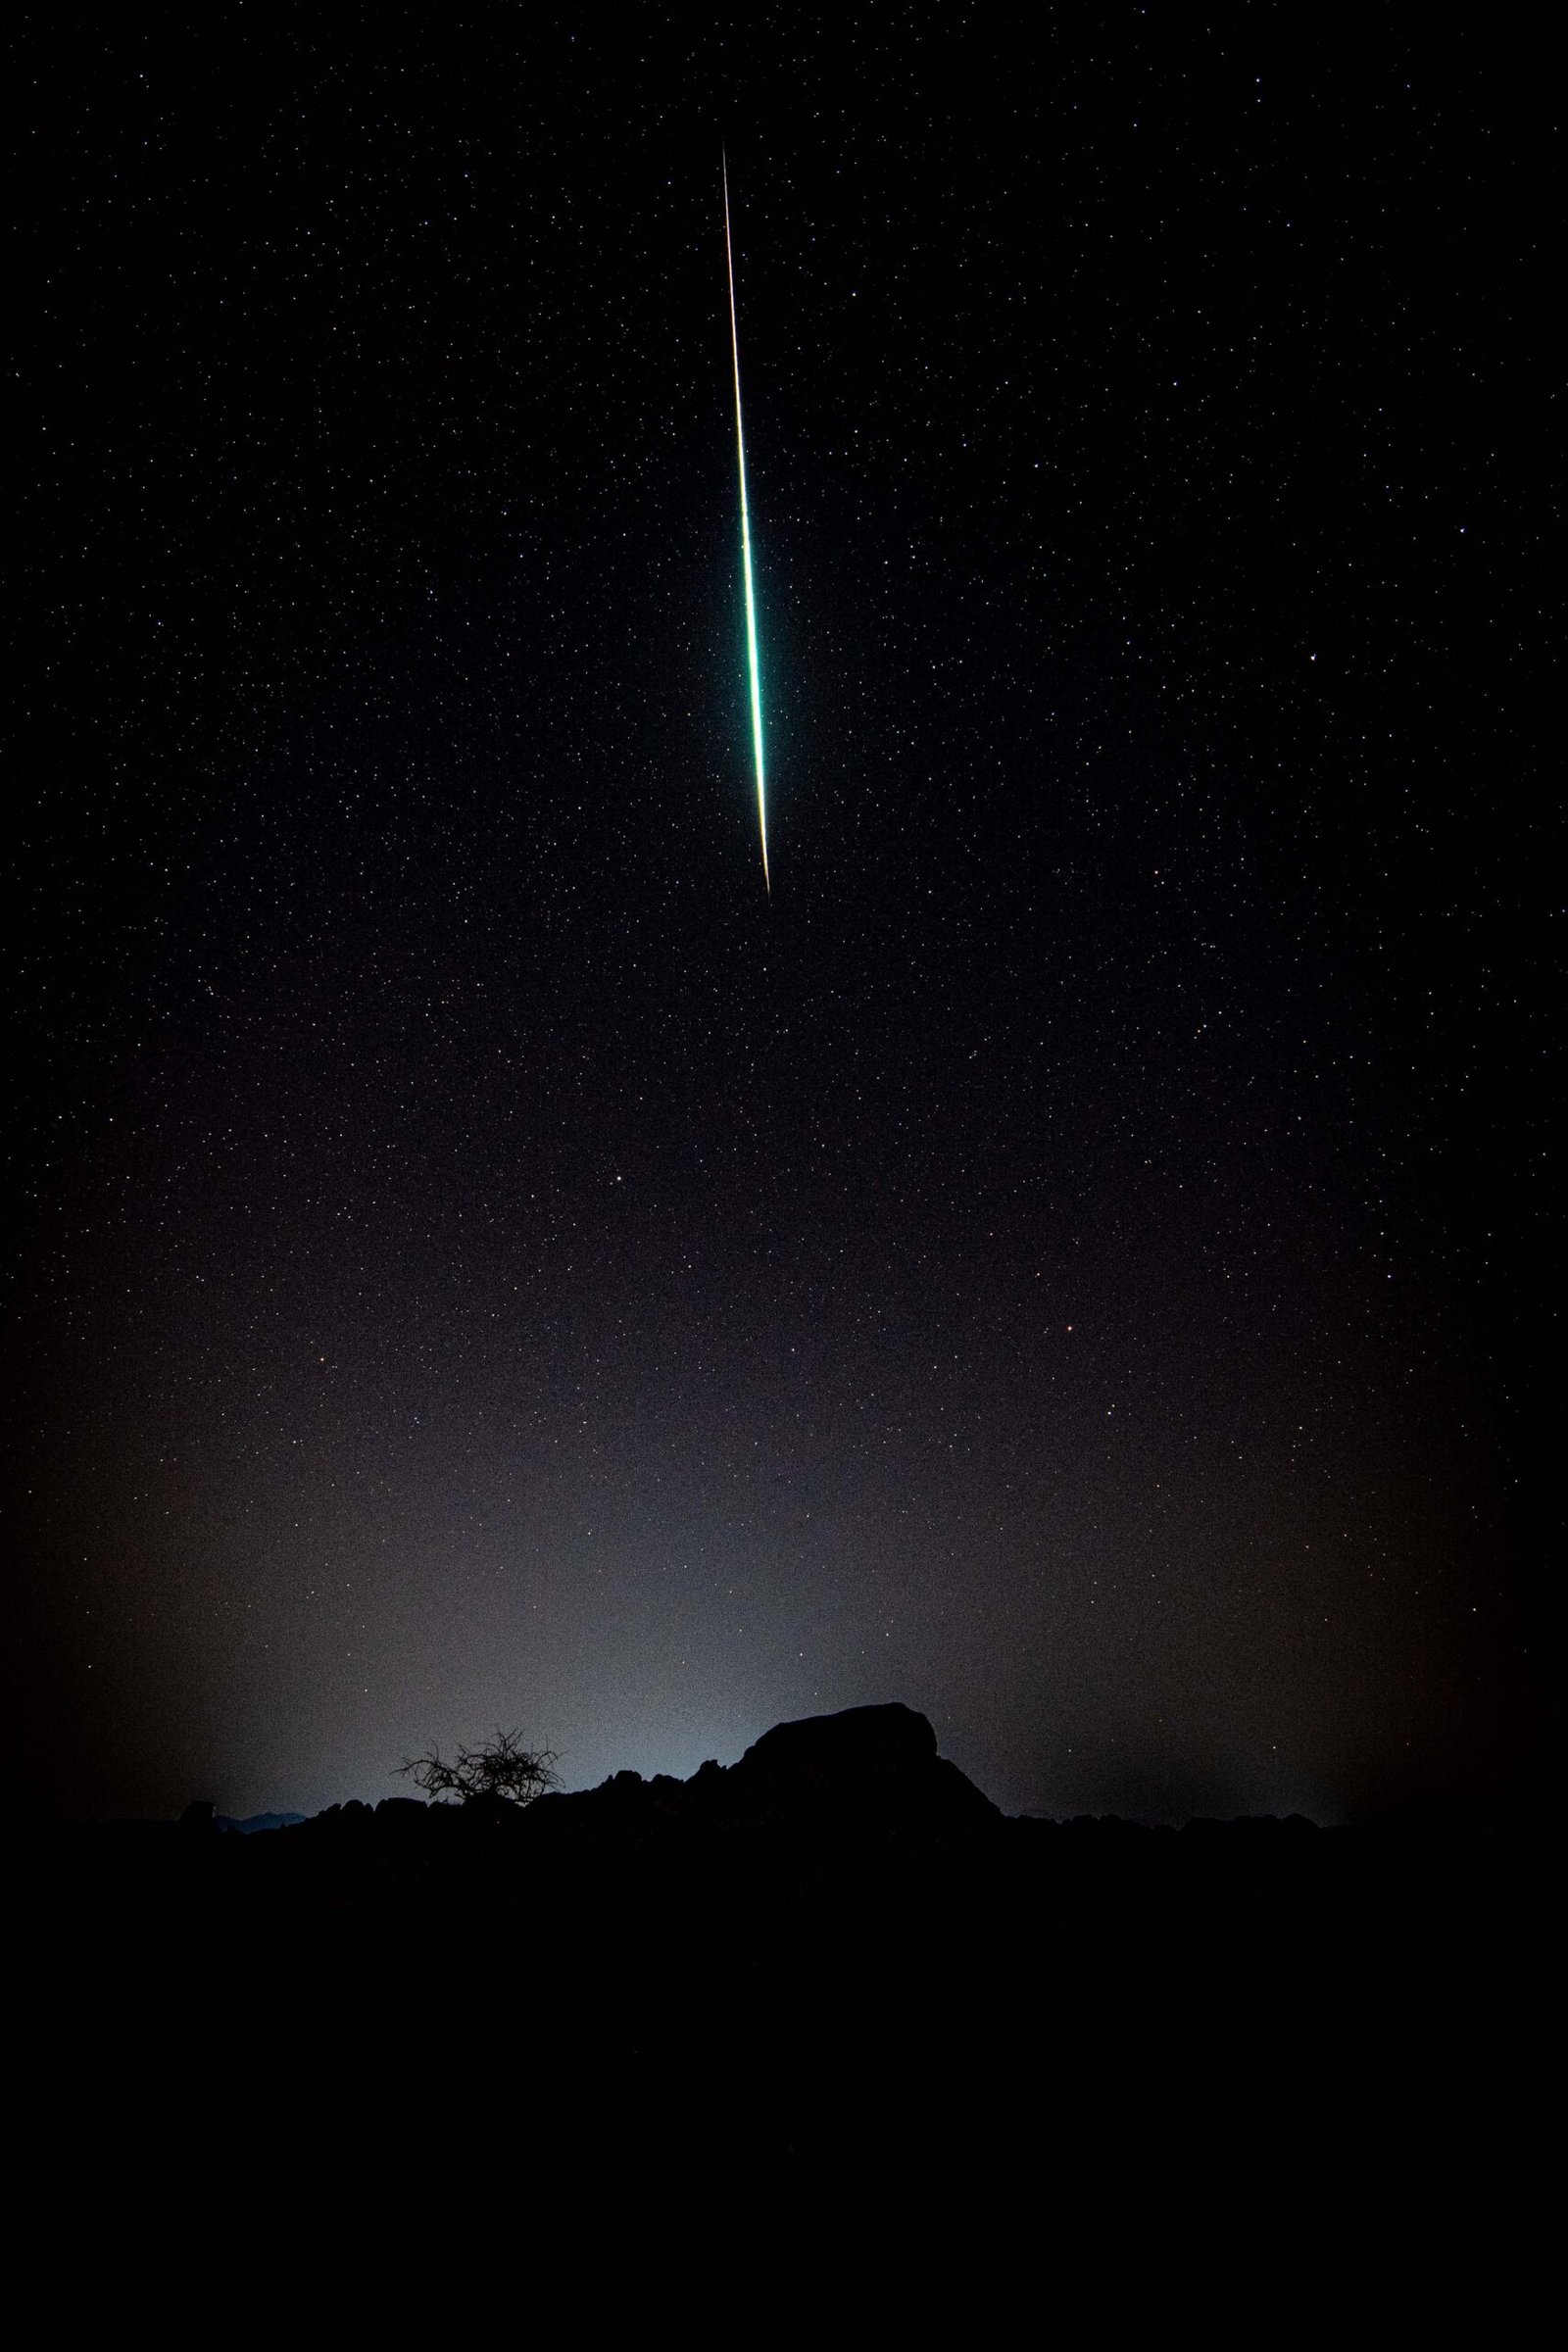 Quadrantids are also known for their bright fireball meteors.